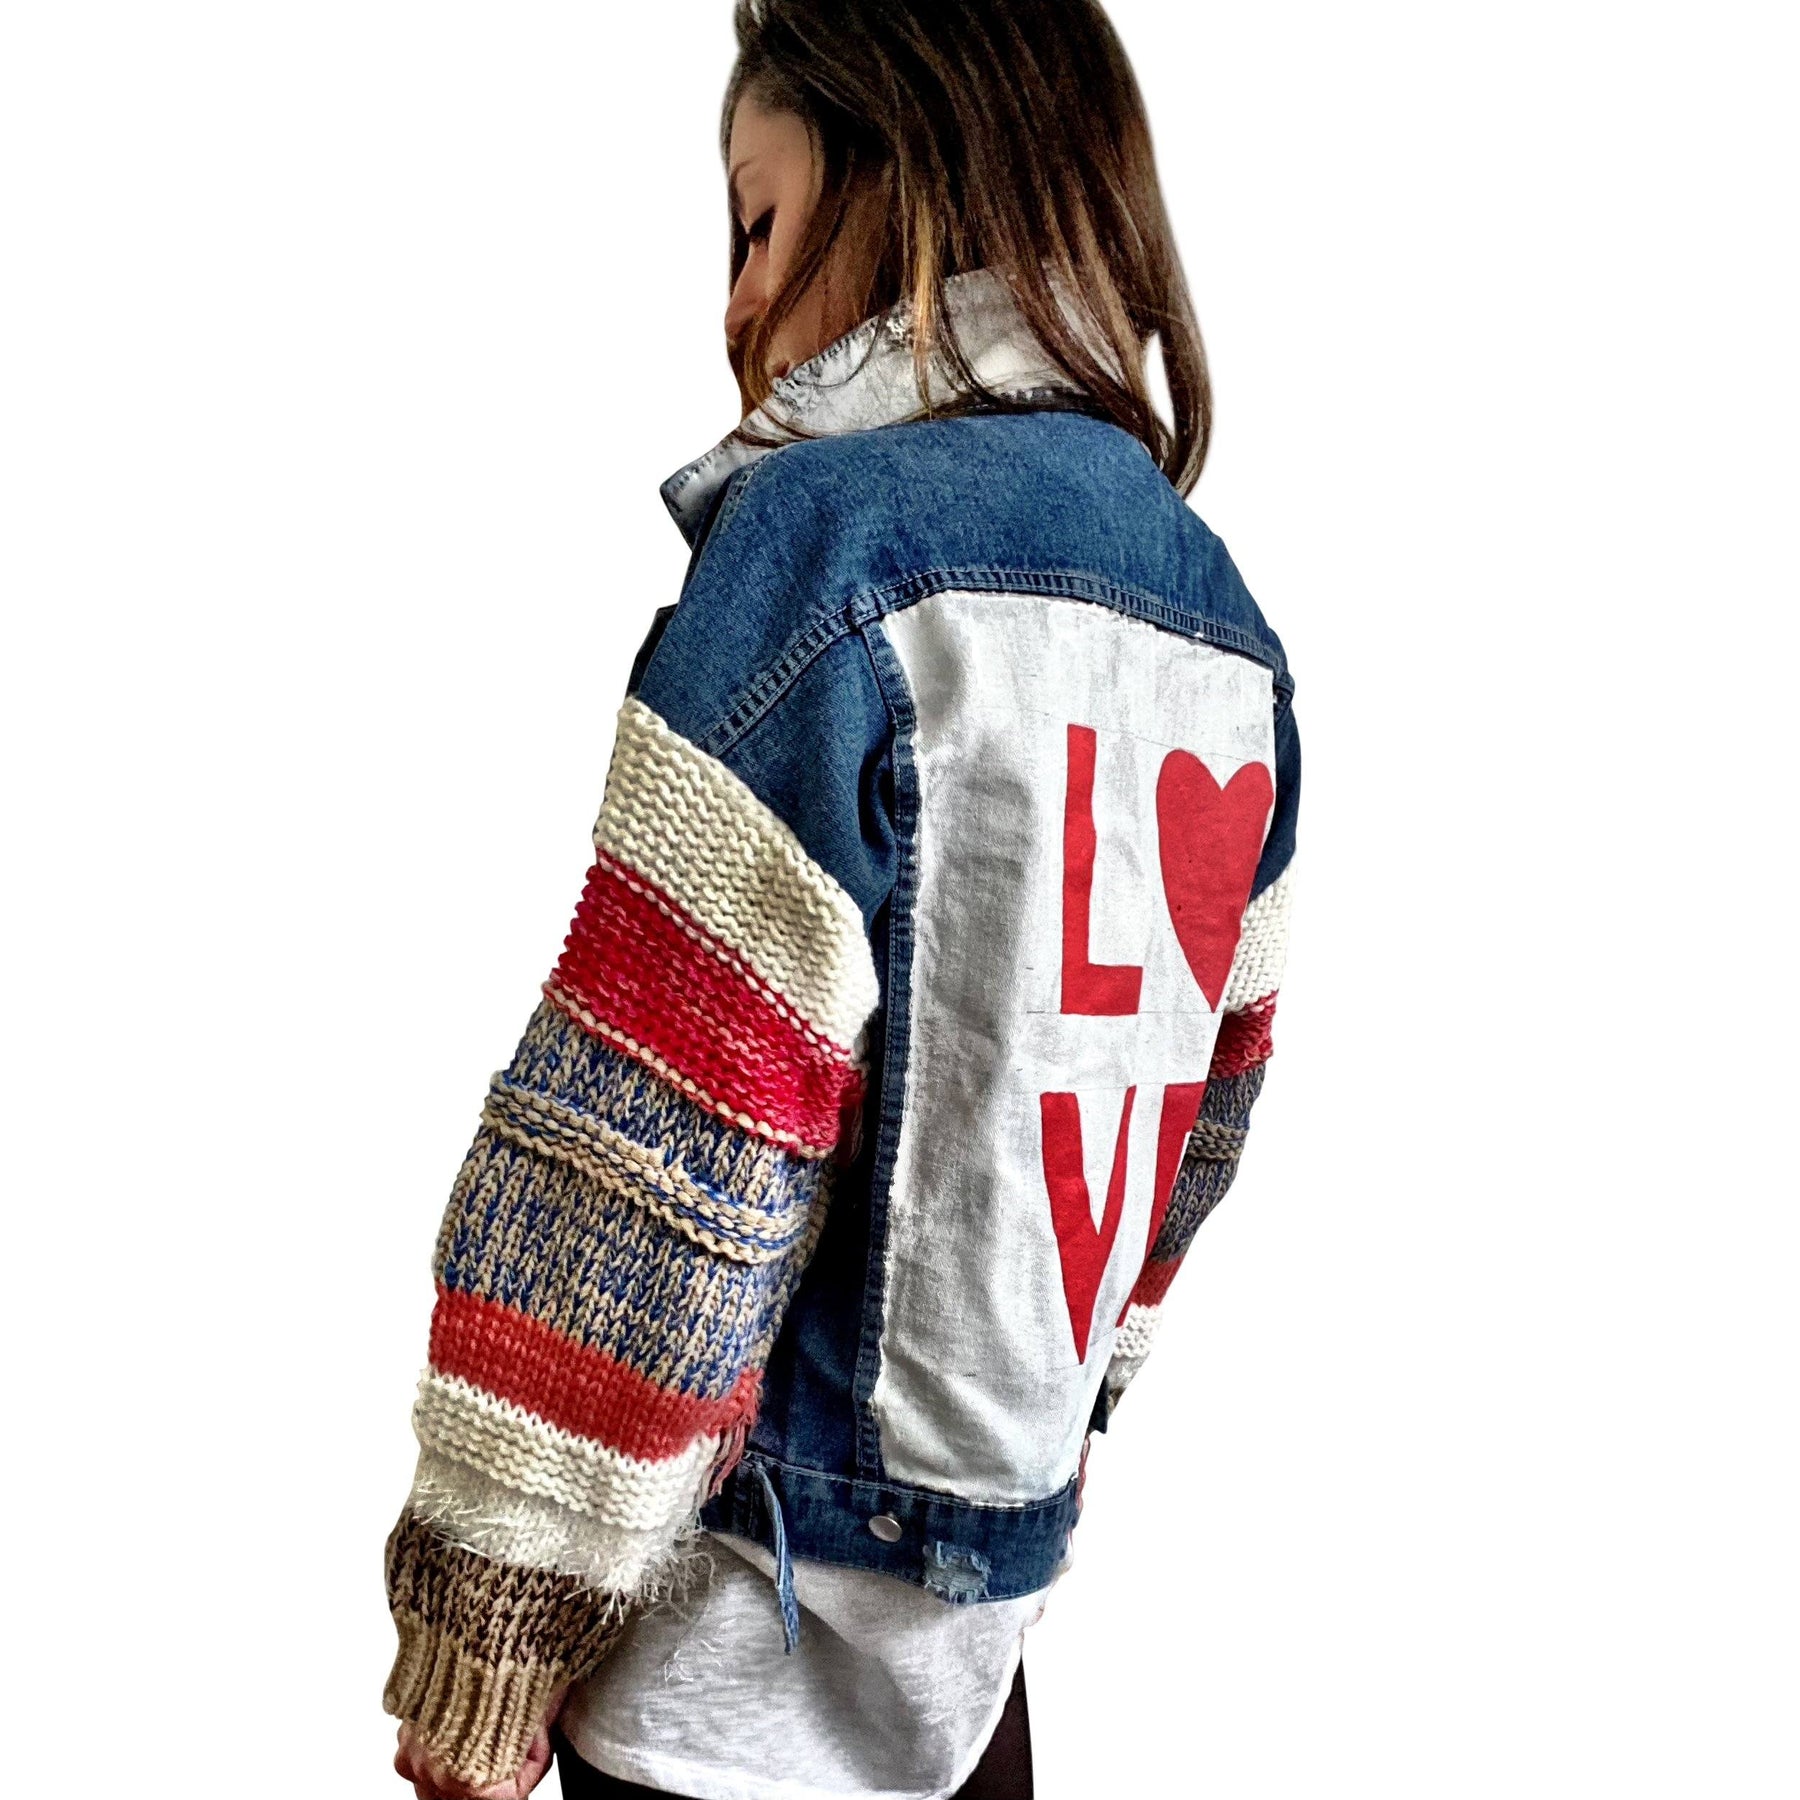 Dark blue denim jacket with  super comfortable knit sleeves. White base on back, with LOVE painted over in red, with a heart Signed @wrenandglory.